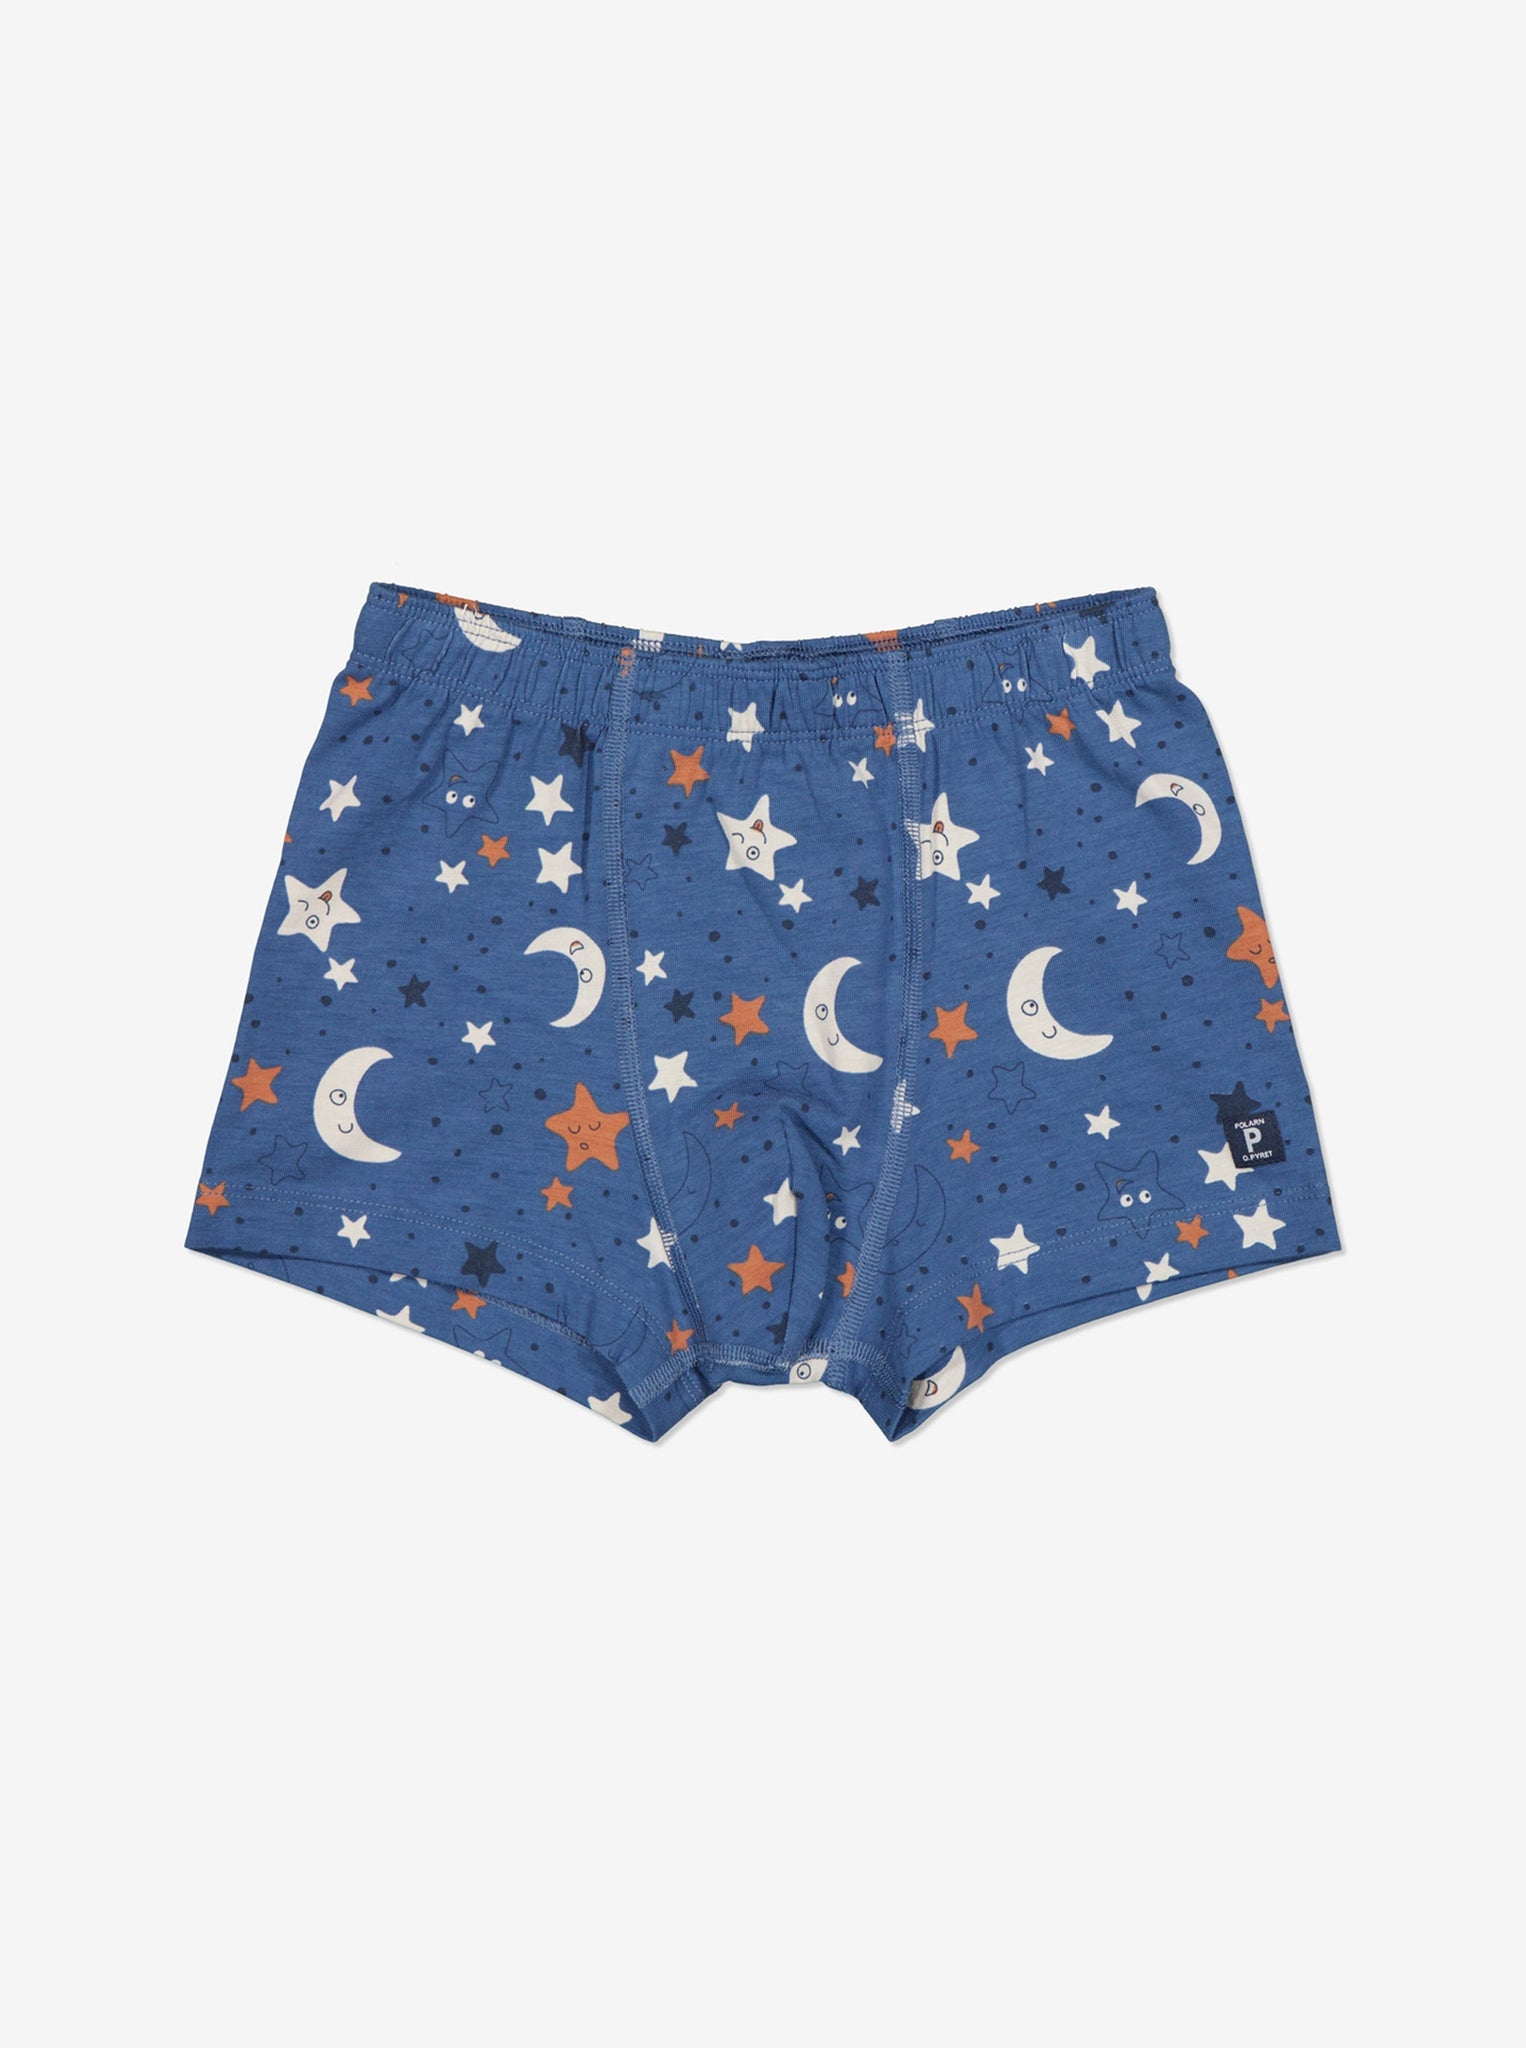 Organic Cotton Blue Boys Boxers from the Polarn O. Pyret kidswear collection. Ethically produced kids clothing.